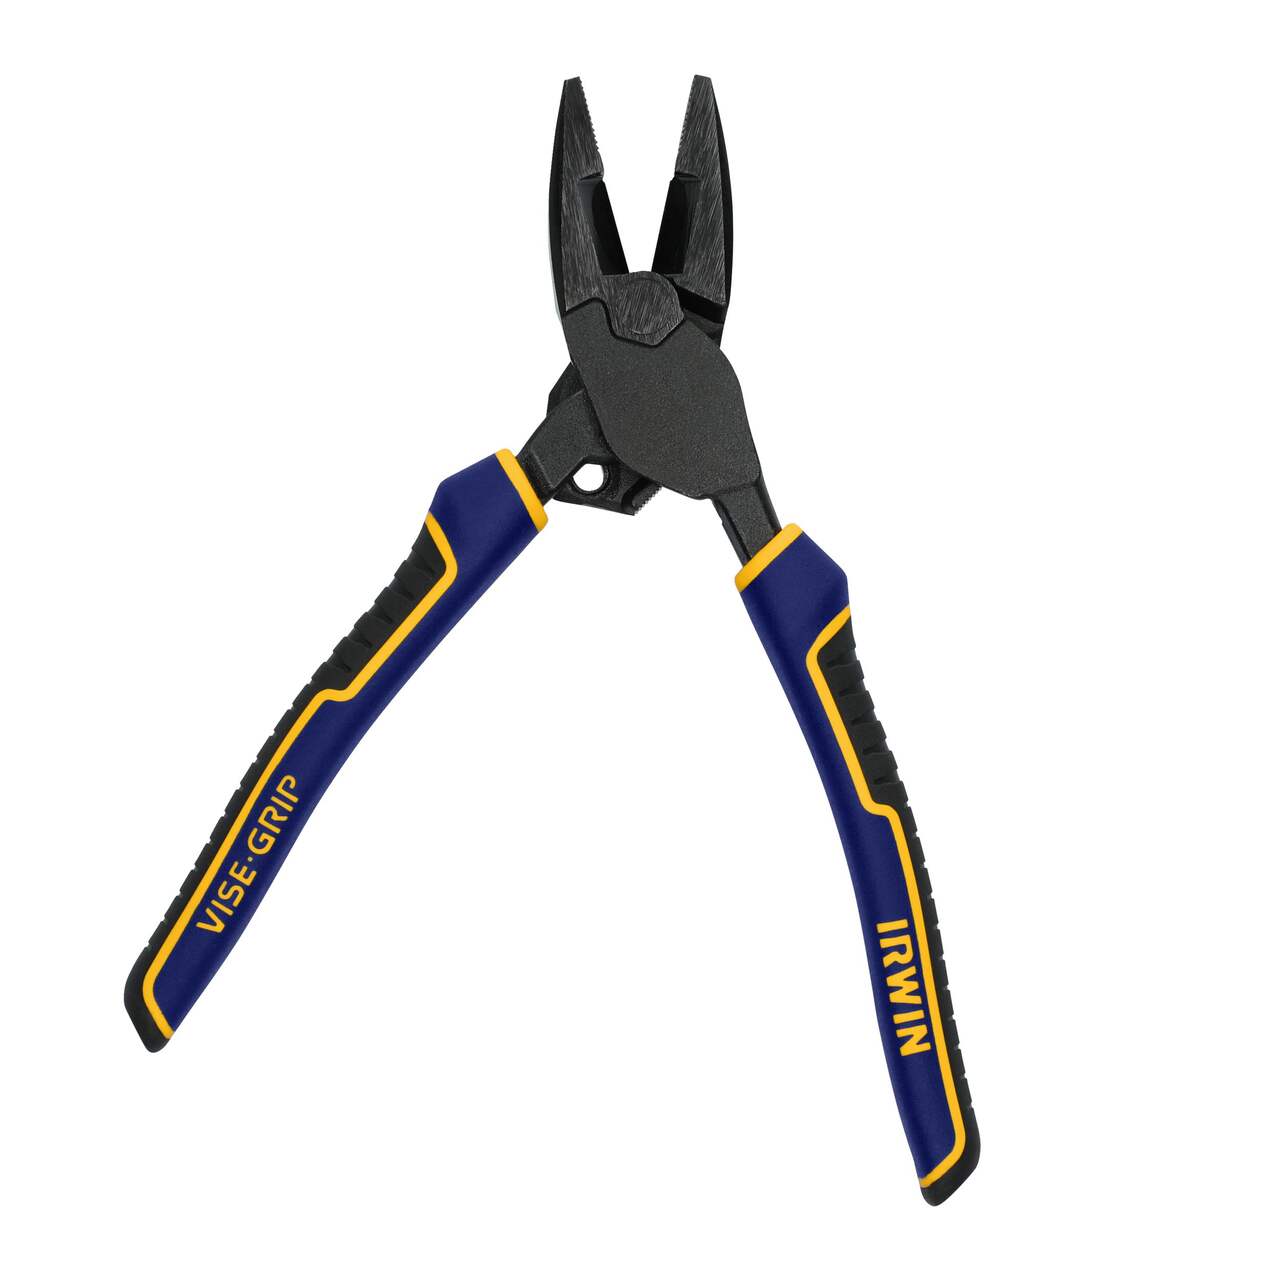 https://media-www.canadiantire.ca/product/fixing/tools/metal-working/0589865/irwin-9-5-power-slot-linemans-pliers-d7843e6a-3f7e-41d9-b6ed-542c6c43cd12-jpgrendition.jpg?imdensity=1&imwidth=1244&impolicy=mZoom